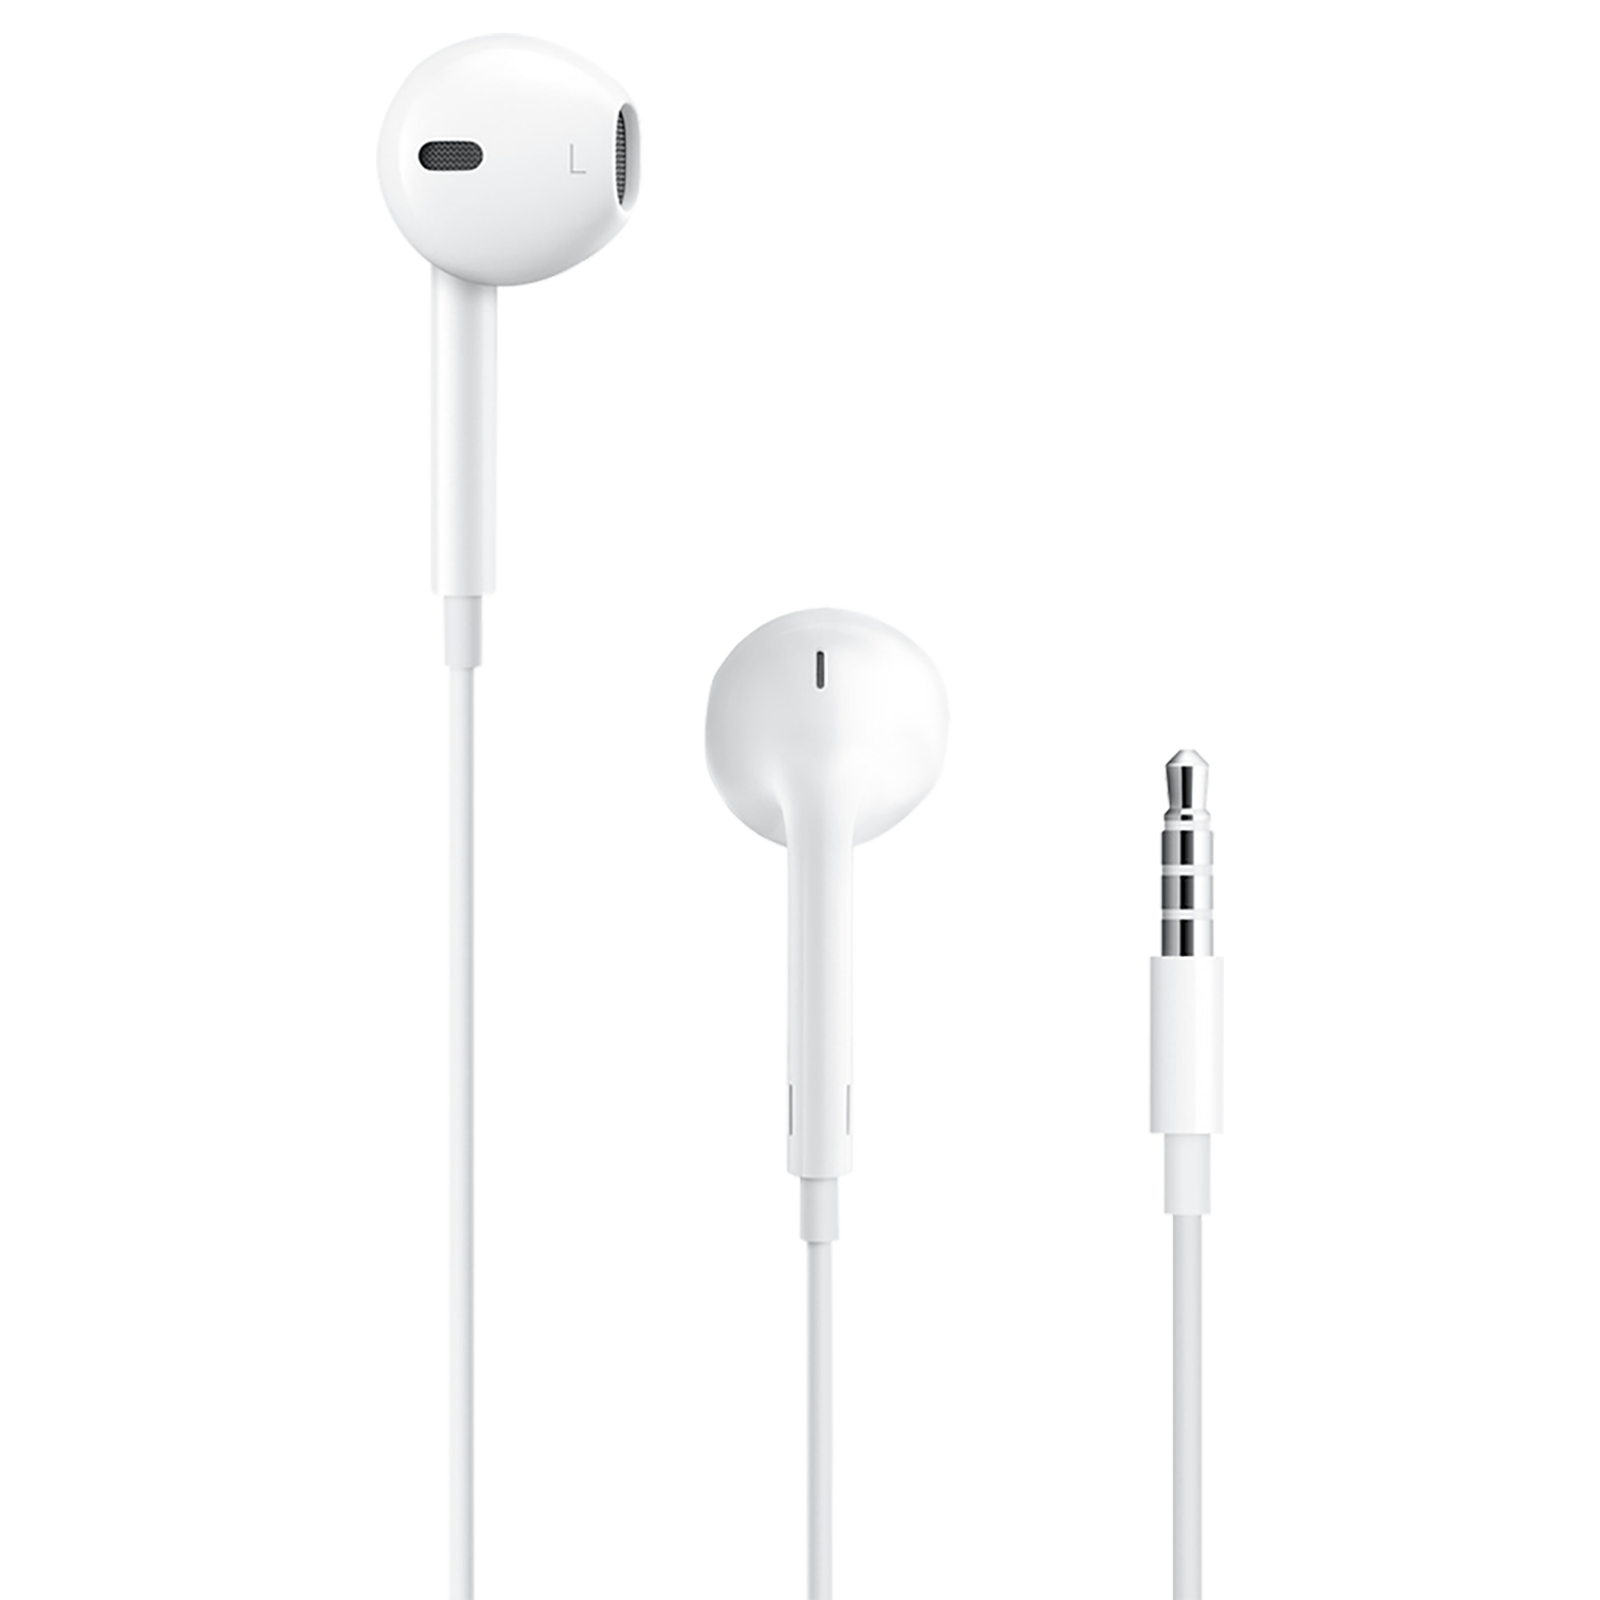 Buy Apple In-Ear Wired MNHF2ZM/A Earphone with Mic (3.5mm Jack, White)  Online Croma